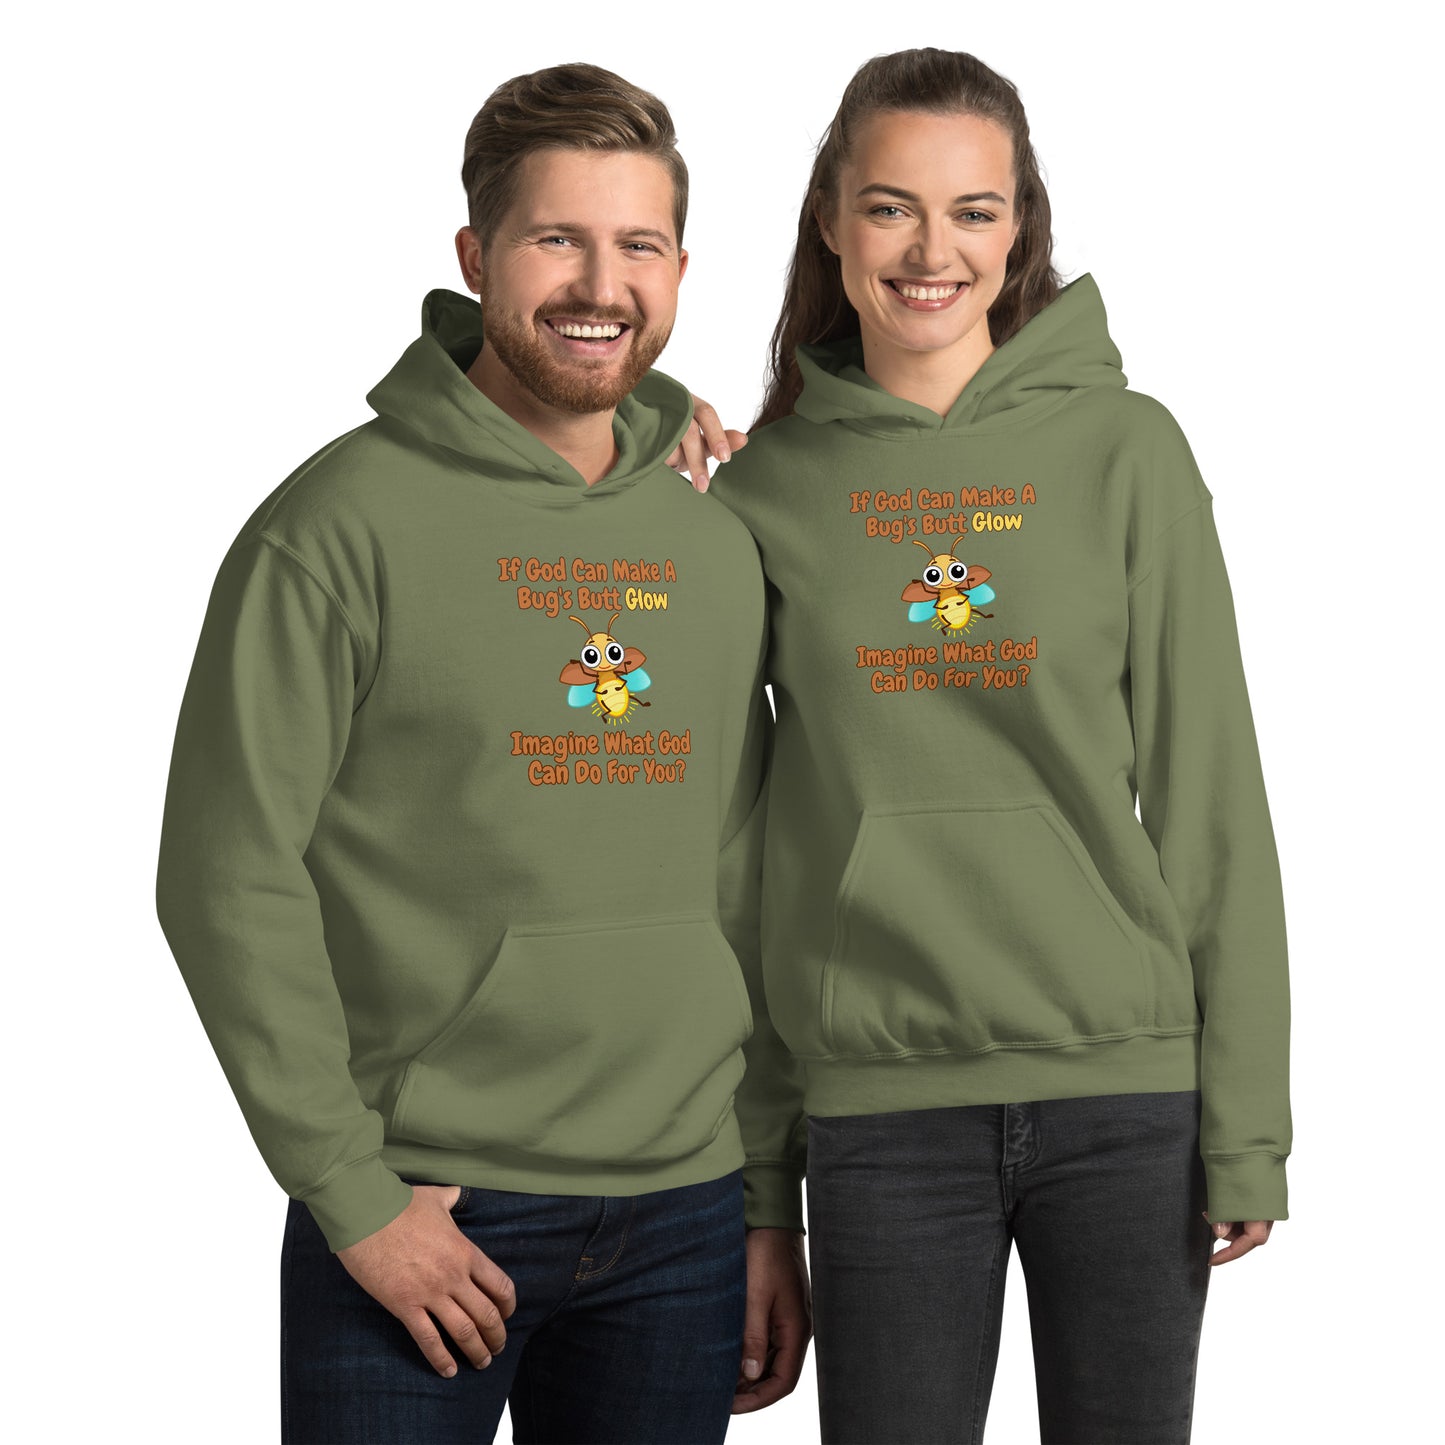 If God Can Make A Bug's Butt Glow Imagine What God Can Do For You Unisex Hoodie